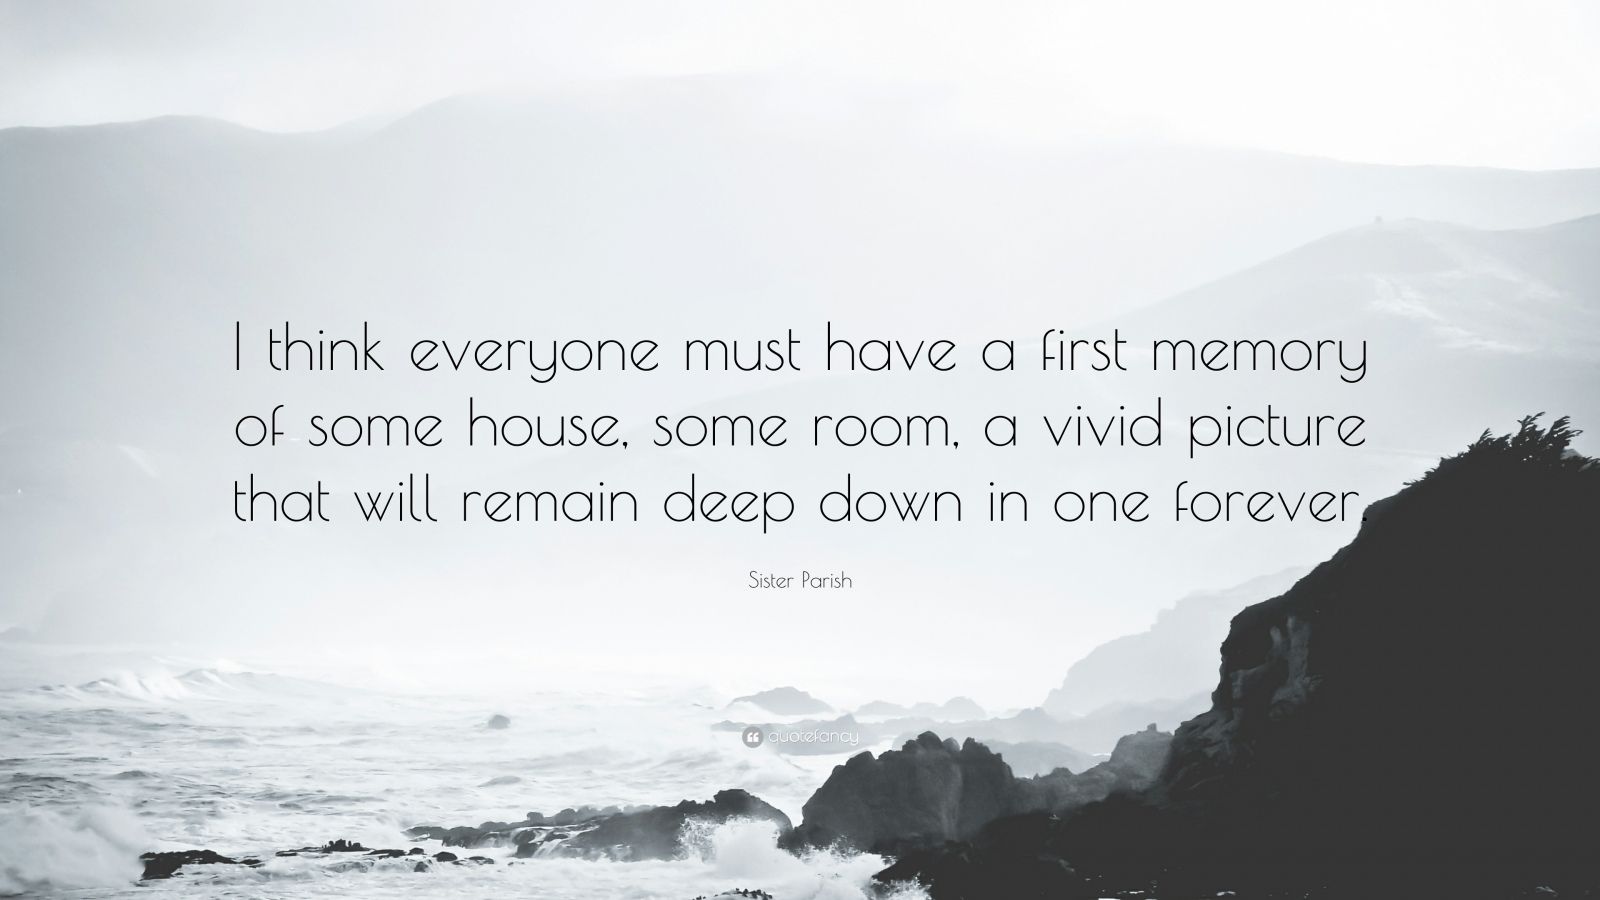 Sister Parish Quote: “I think everyone must have a first memory of